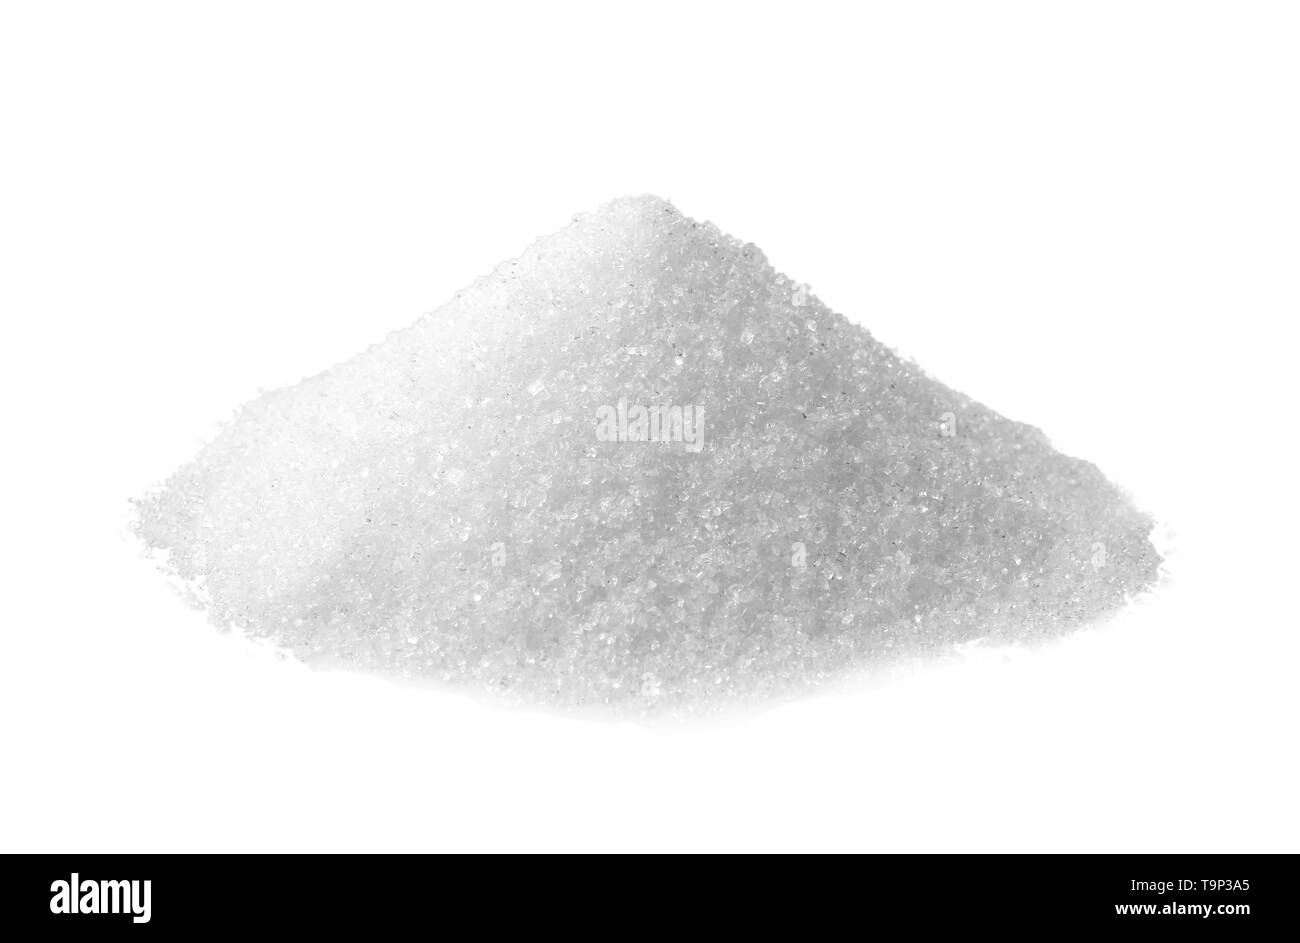 Heap of refined sugar on white background Stock Photo